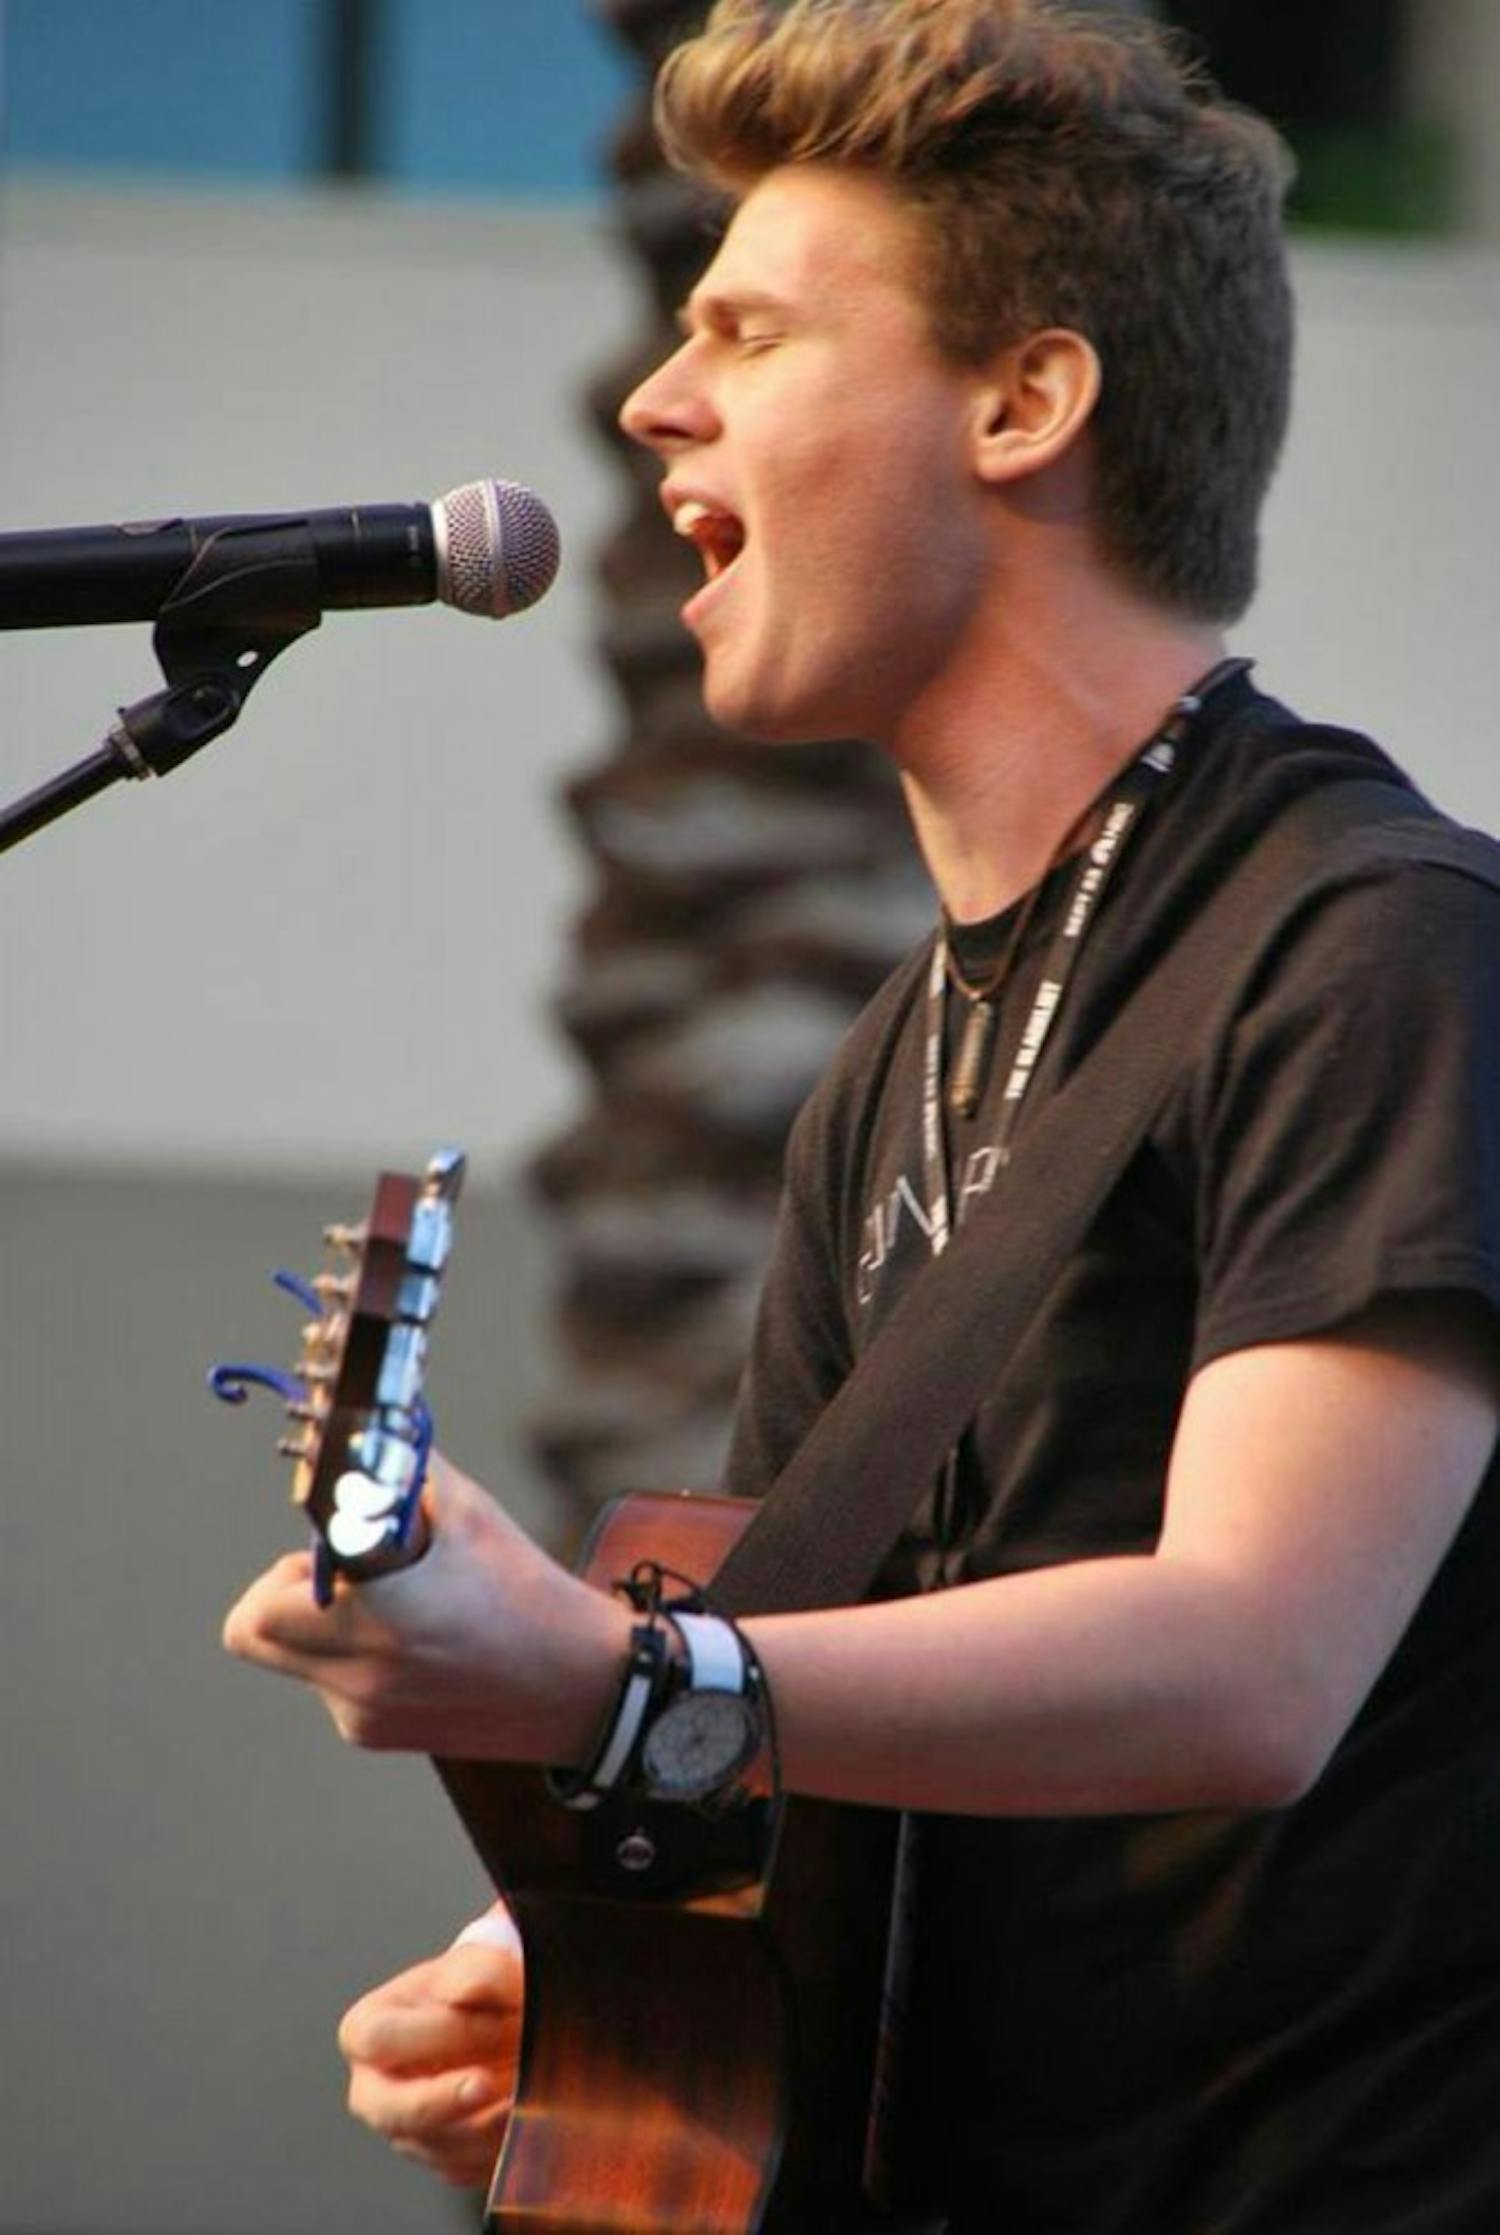 19-year-old pop singer Tyler Matl will be performing at OMG Music Fest at Cat’s Cradle in Carrboro tonight.